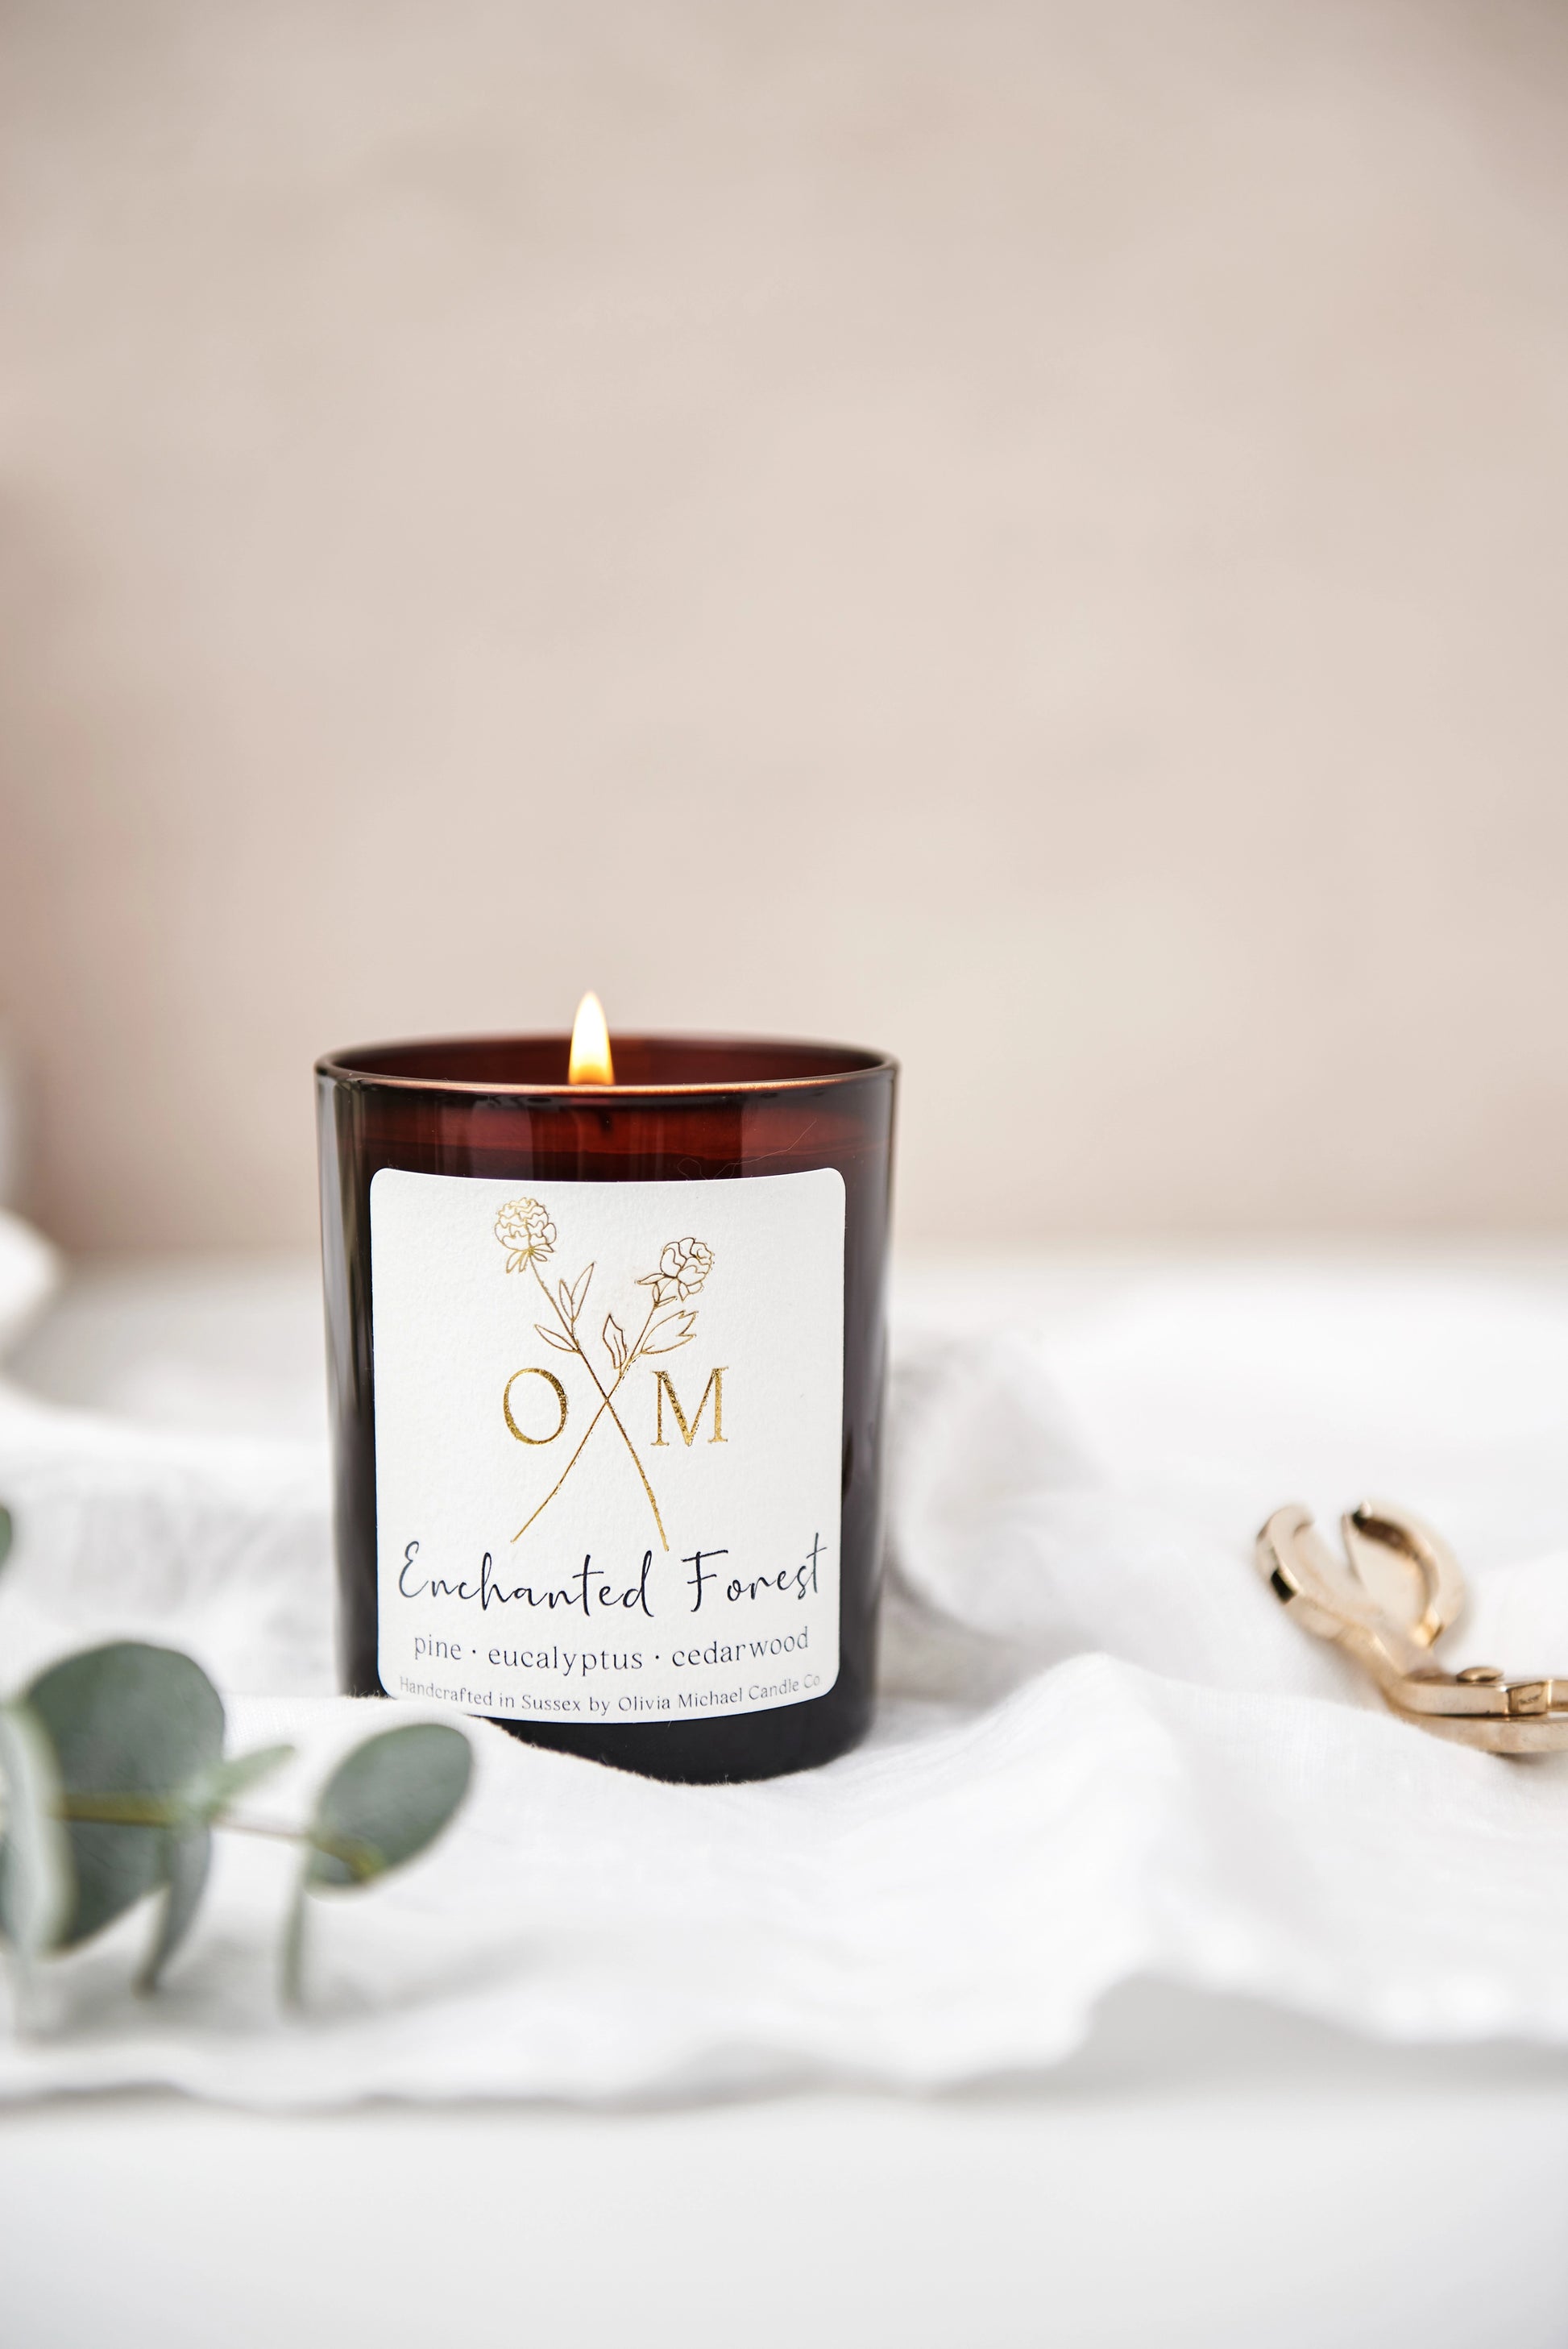 Our pine and eucalyptus scented candle is on display in an amber glass jar.